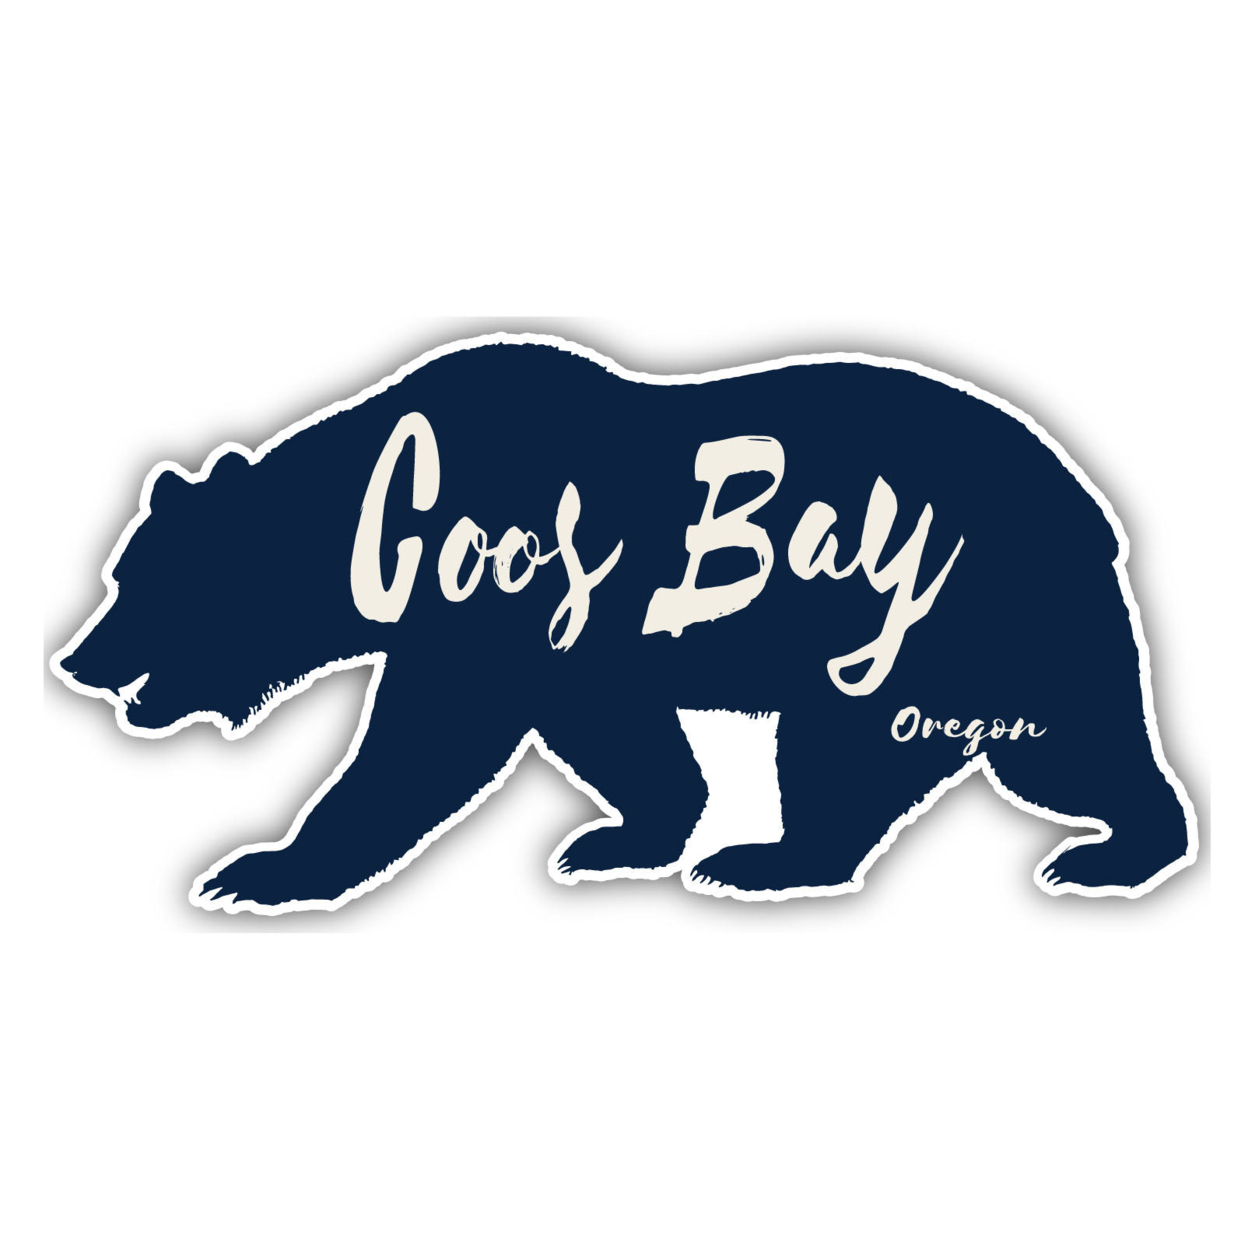 Coos Bay Oregon Souvenir Decorative Stickers (Choose Theme And Size) - 4-Pack, 12-Inch, Bear